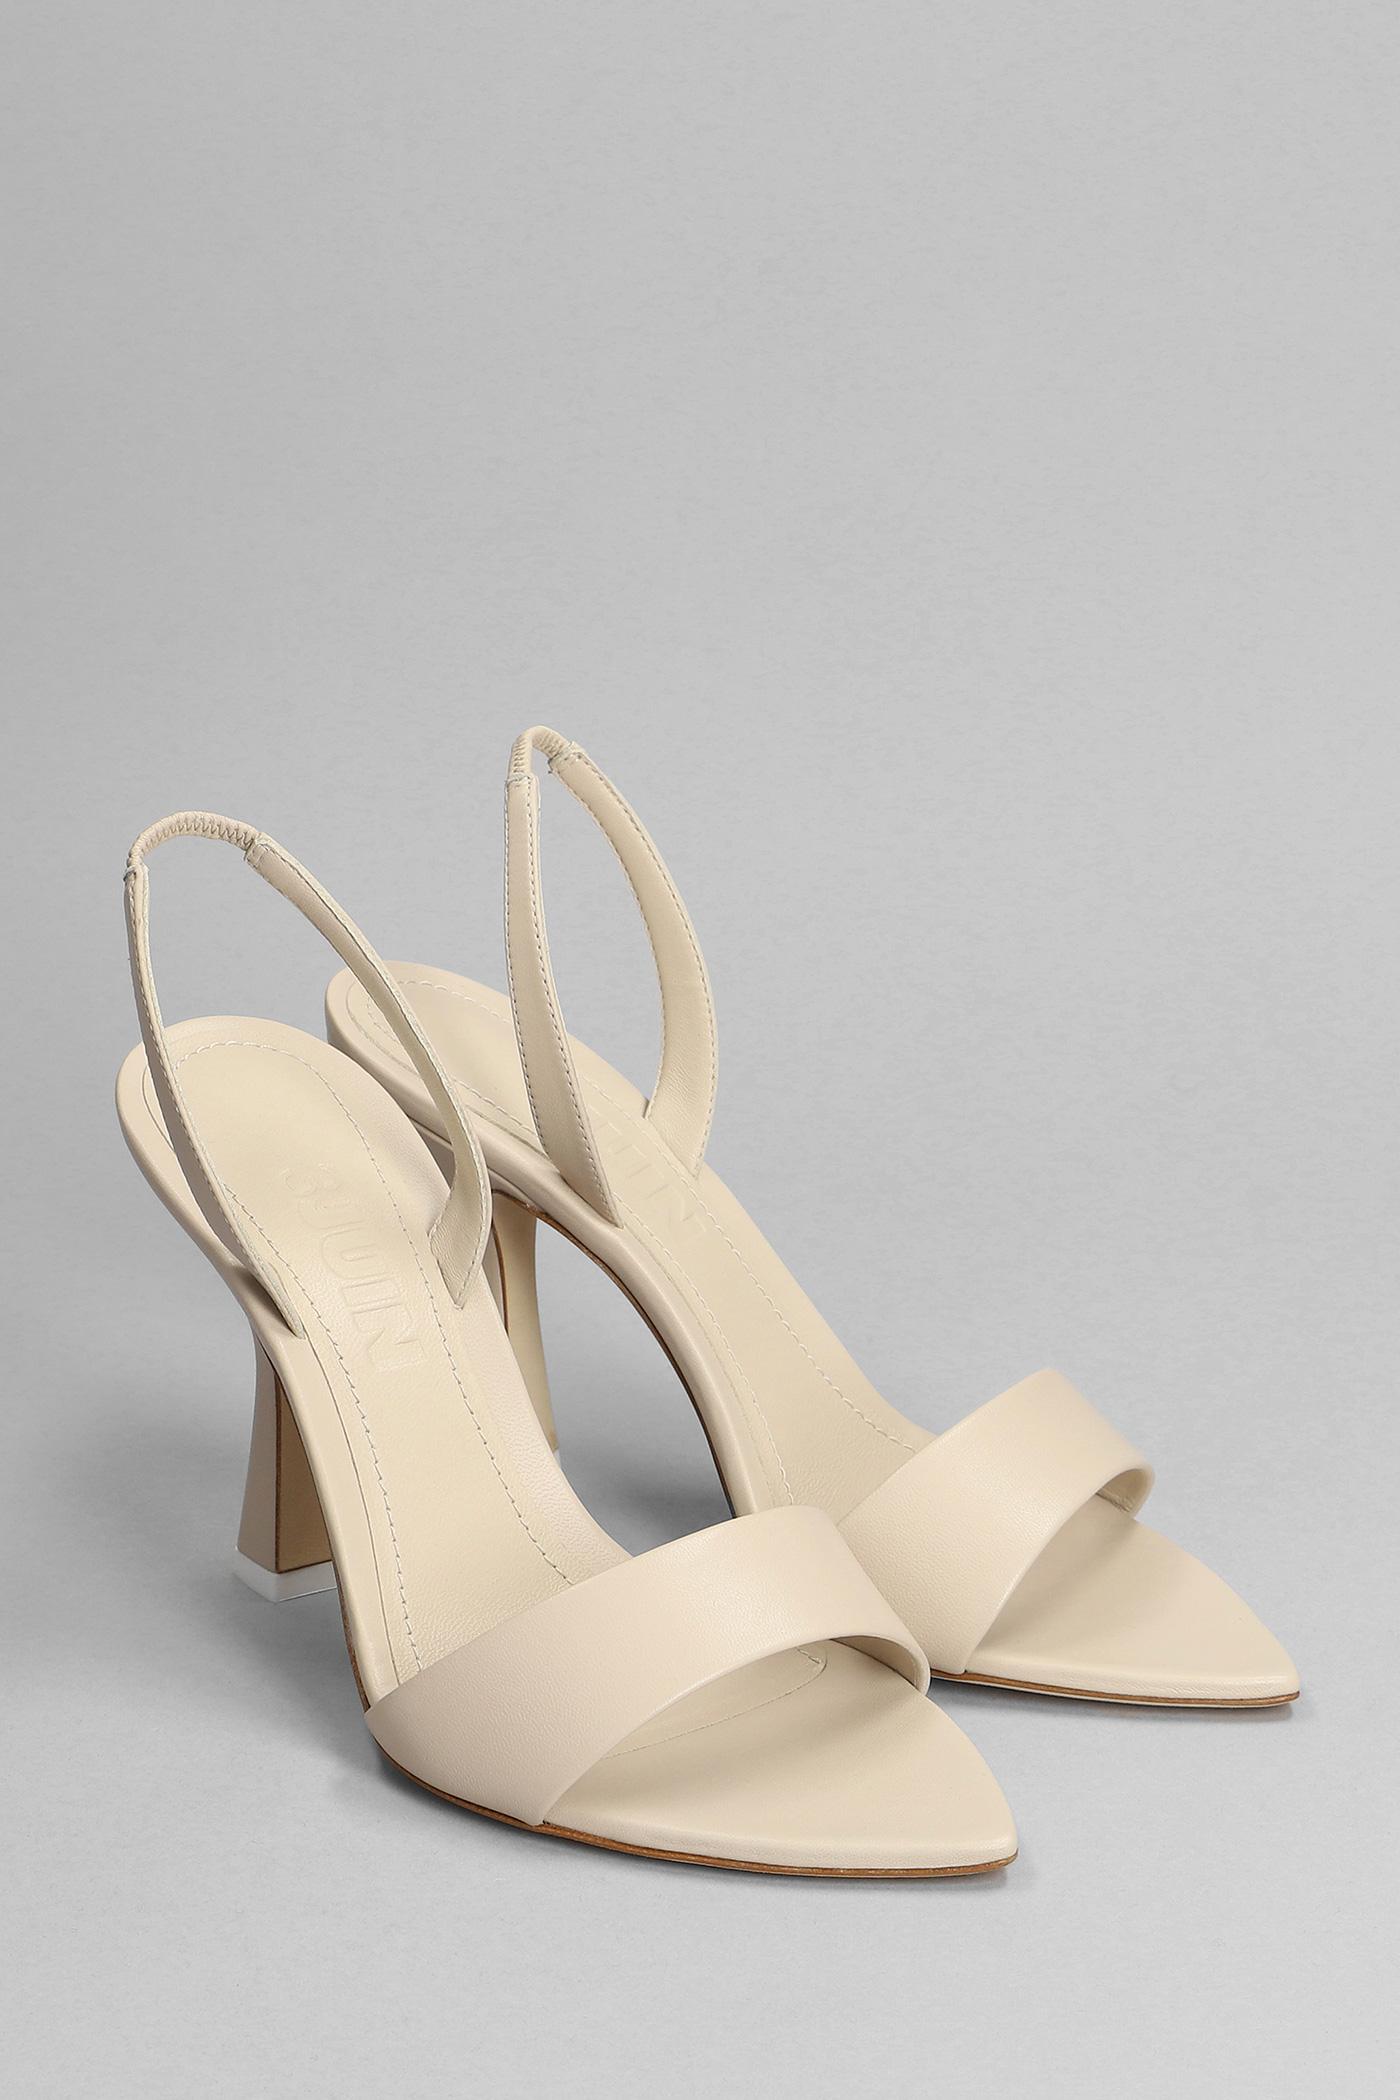 3Juin Lily 095 Sandals In Beige Leather in Natural | Lyst